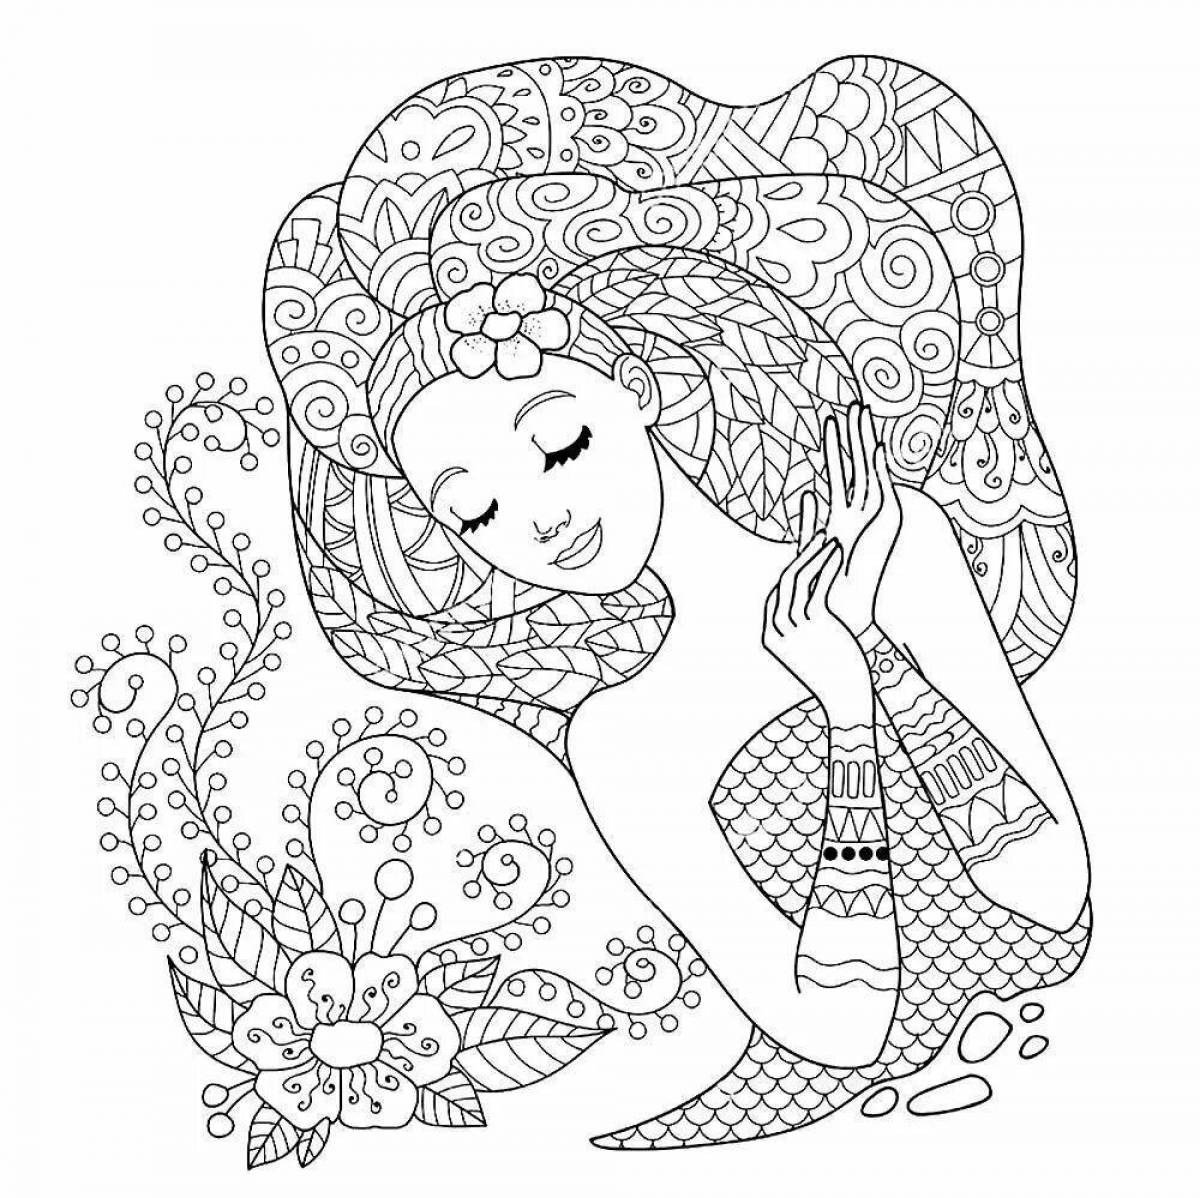 Fun coloring book relaxation for kids